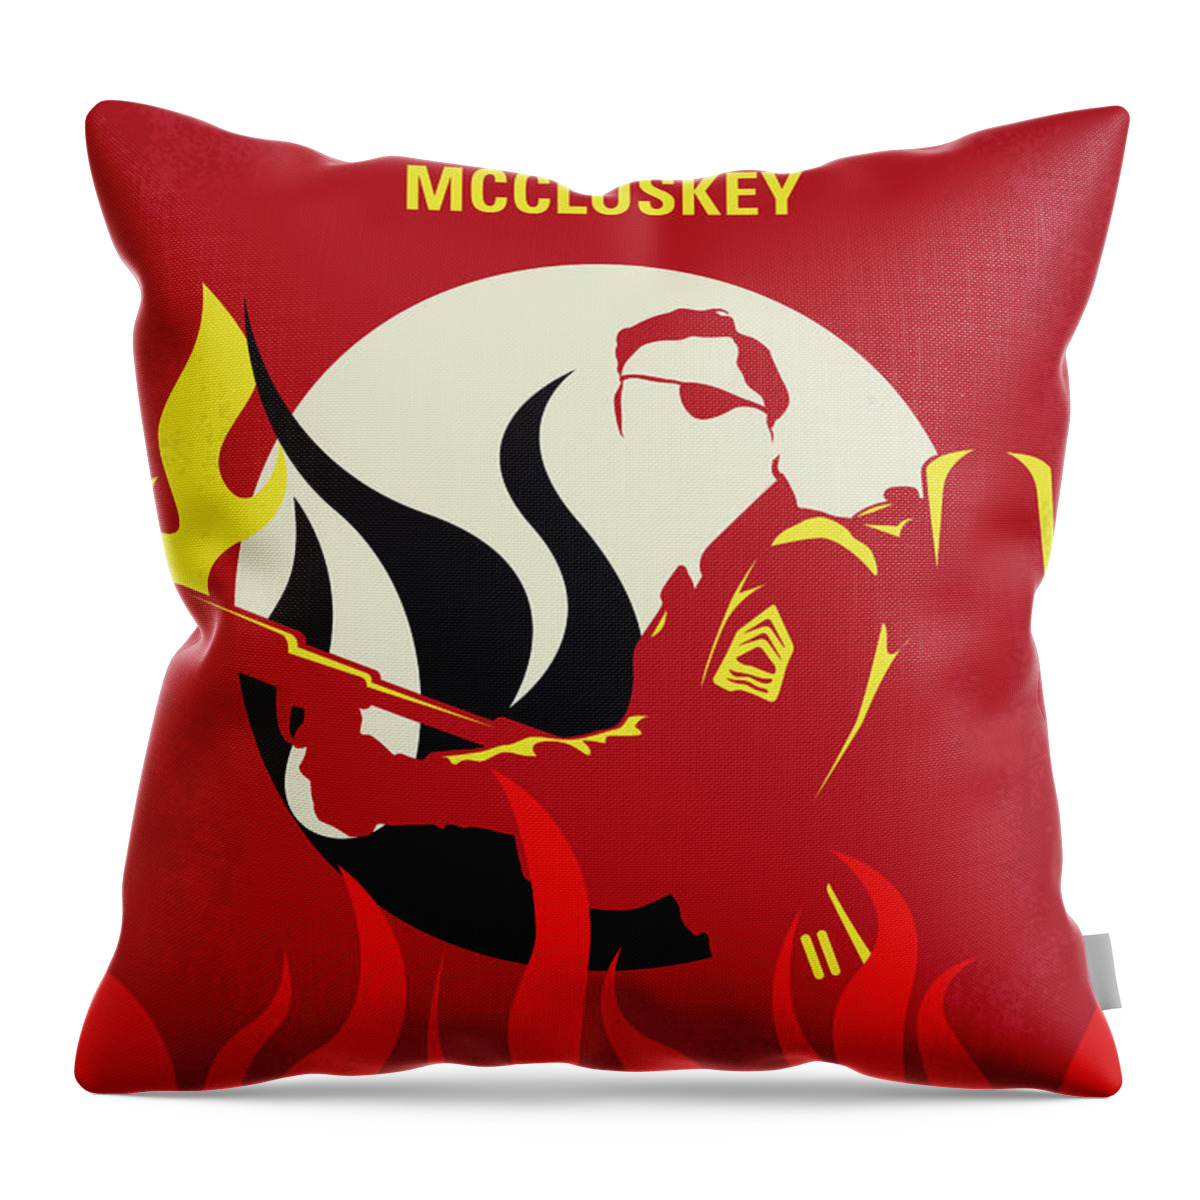 The 14 Fists Of Mccluskey Throw Pillow featuring the digital art No1118 My The 14 Fists of McCluskey minimal movie poster by Chungkong Art